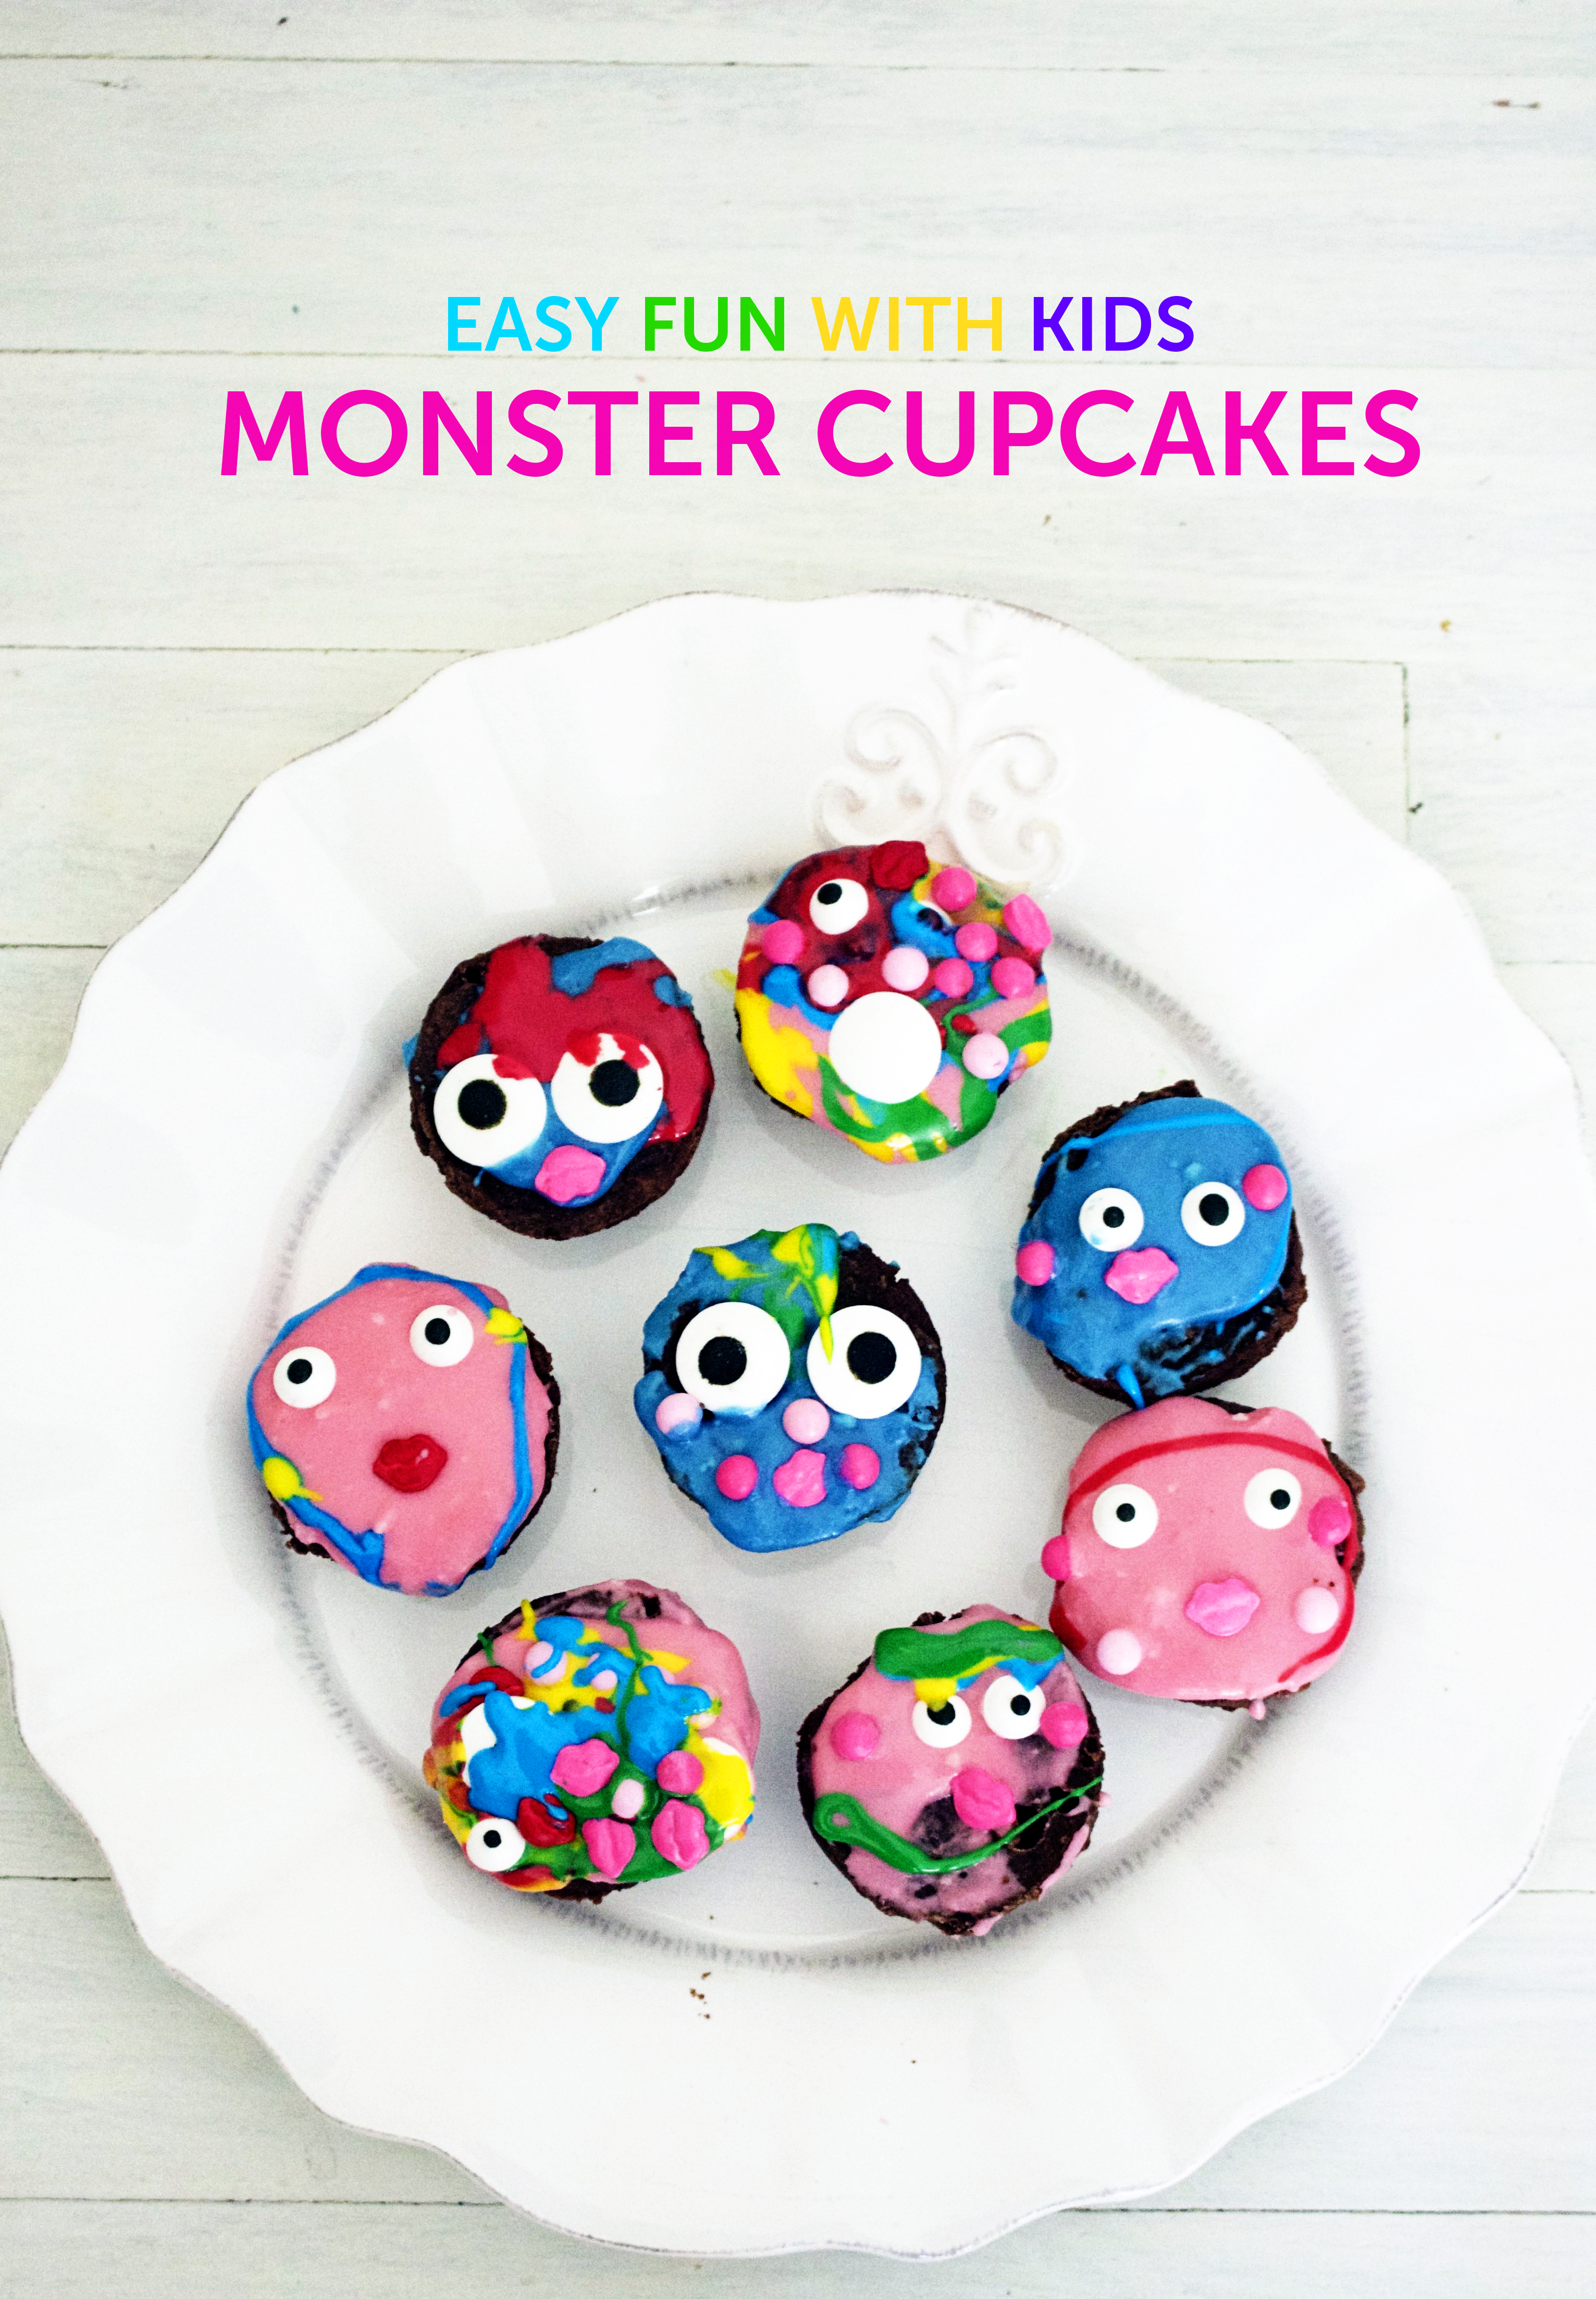 easy fun with kids - monster cupcakes - Fabulistas